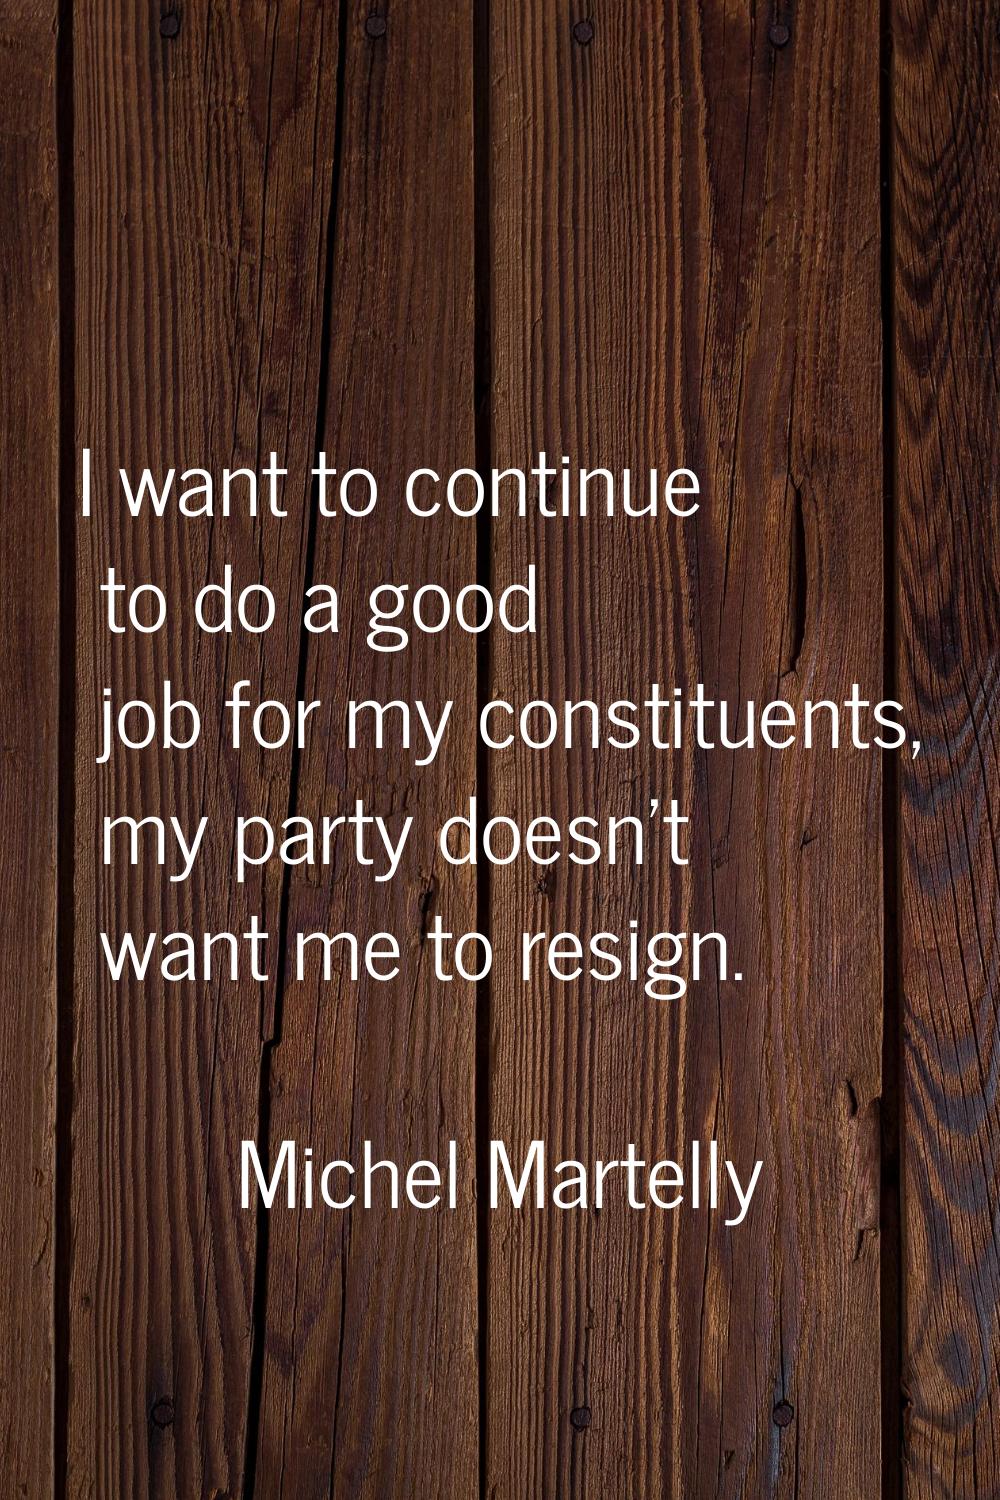 I want to continue to do a good job for my constituents, my party doesn't want me to resign.